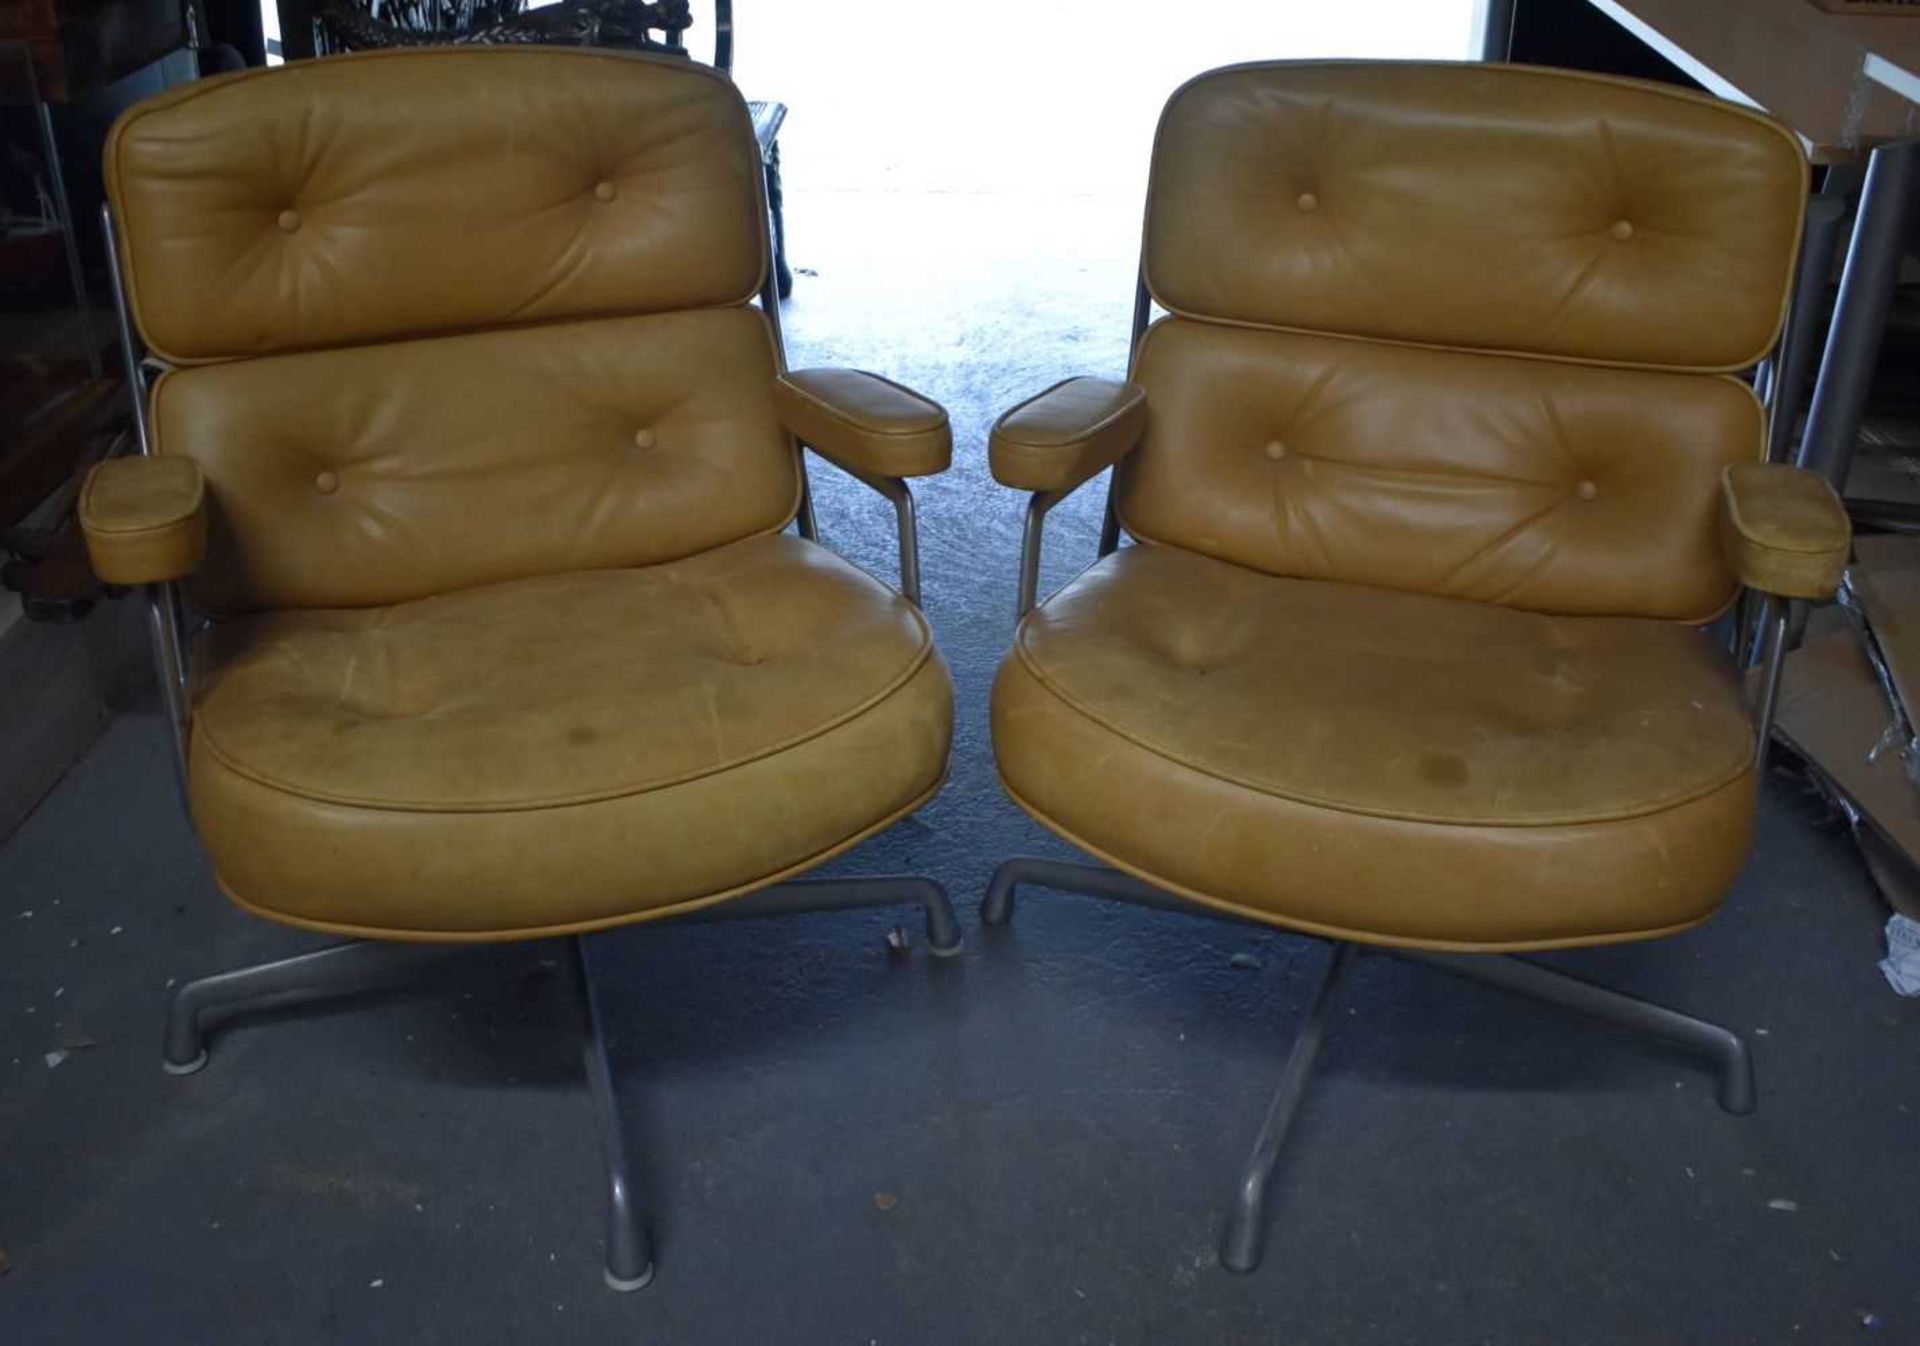 A STYLISH PAIR OF HERMAN MILLER LEATHER SWIVEL CHAIRS. 78 cm x 62 cm.